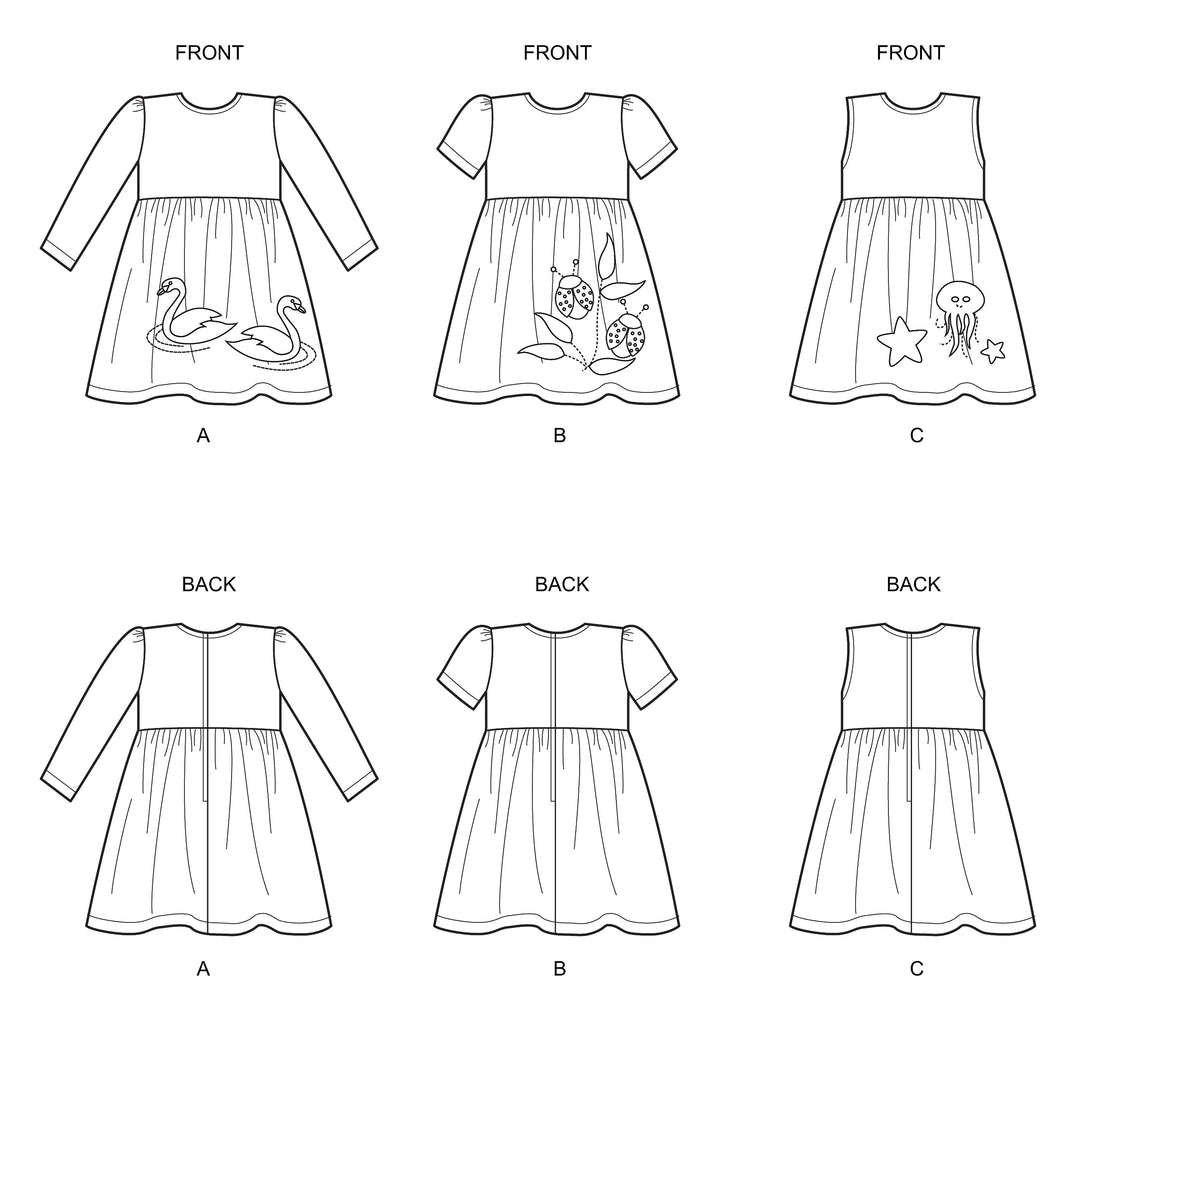 6647 New Look Sewing Pattern N6647 Toddlers' Dresses with Appliques